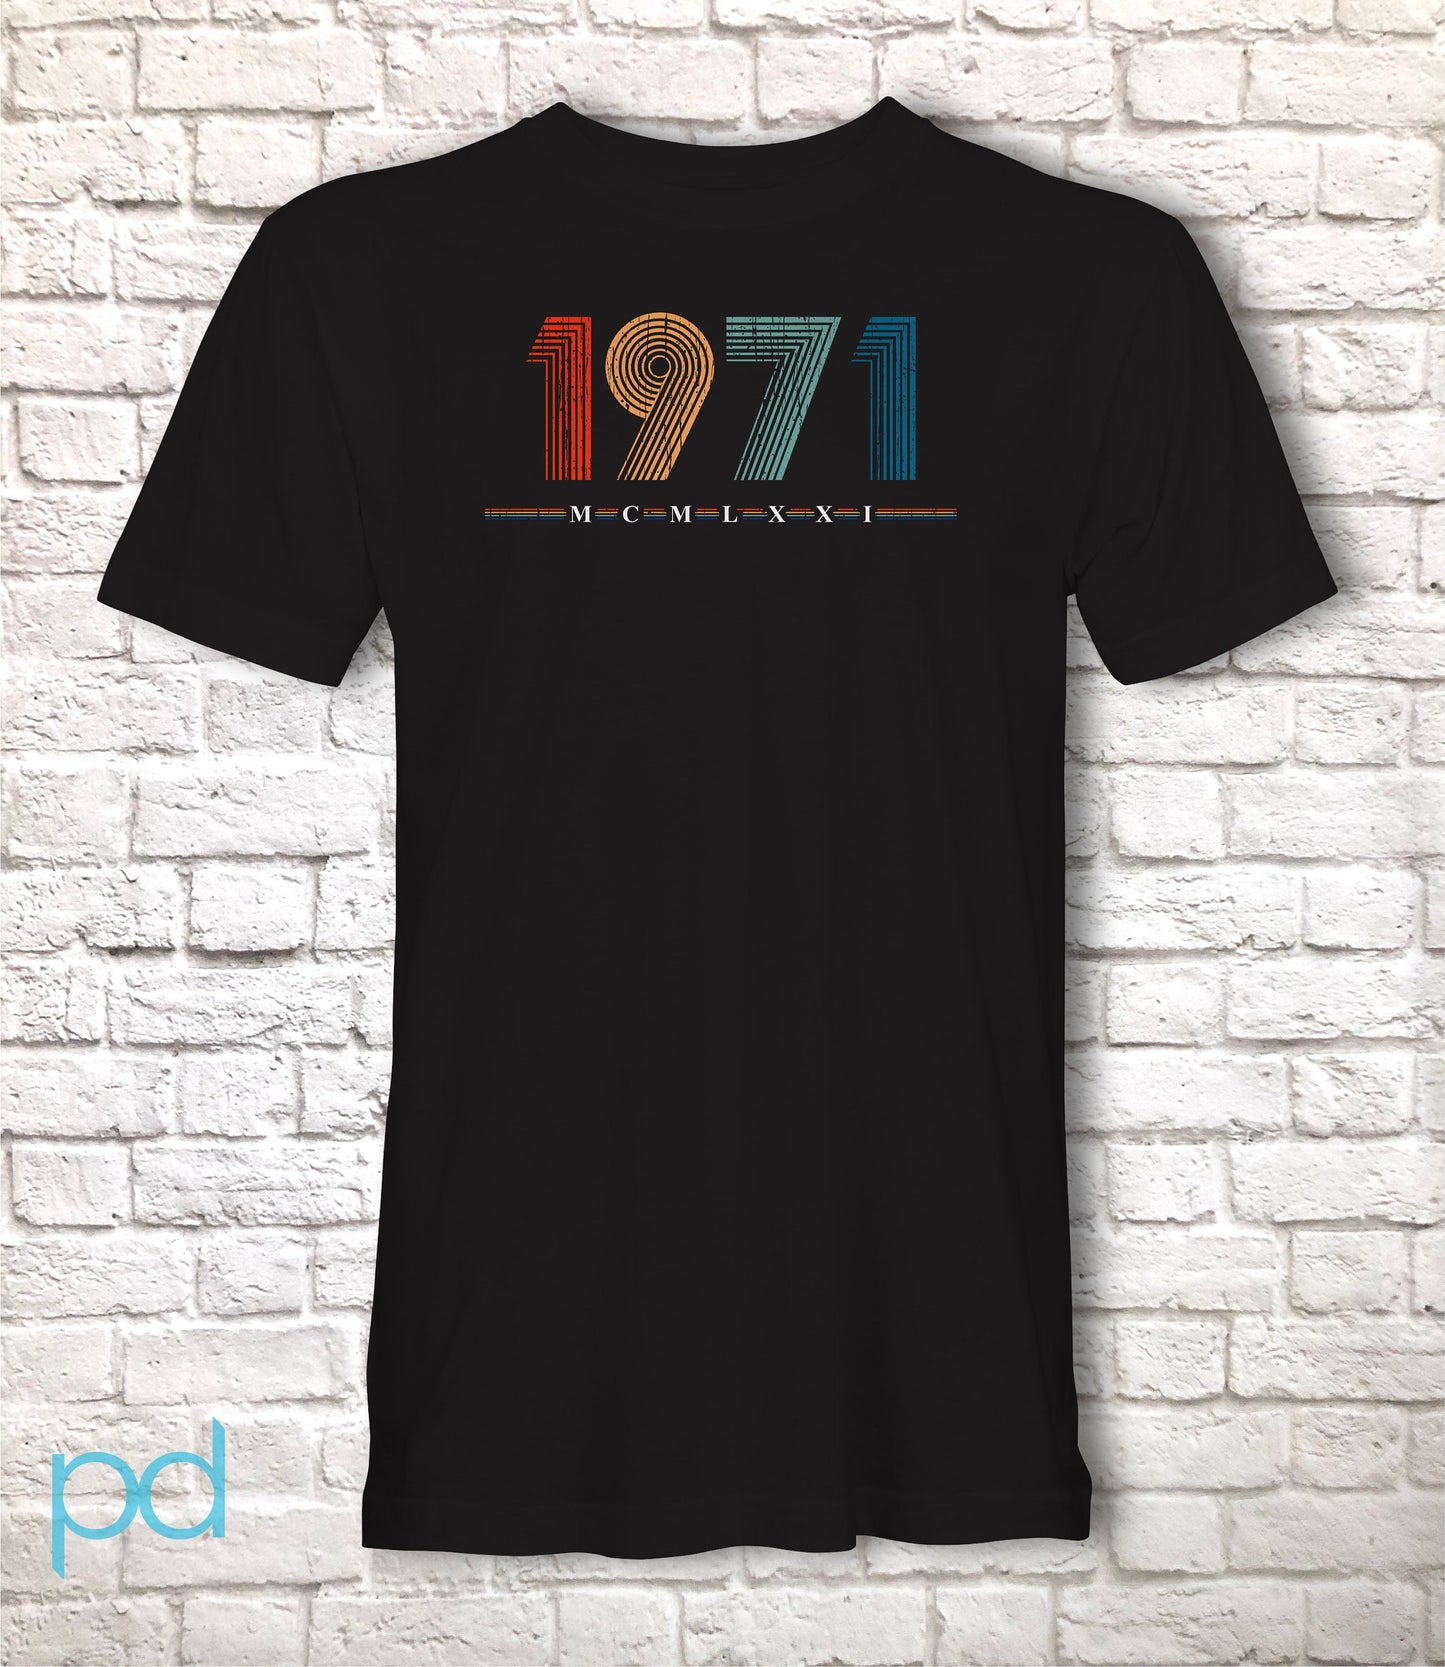 51st Birthday T Shirt, 1971 Gift T-Shirt in Retro & Vintage 70s style, MCMLXXI Fiftieth Bday Tee Shirt Top For Men or Women